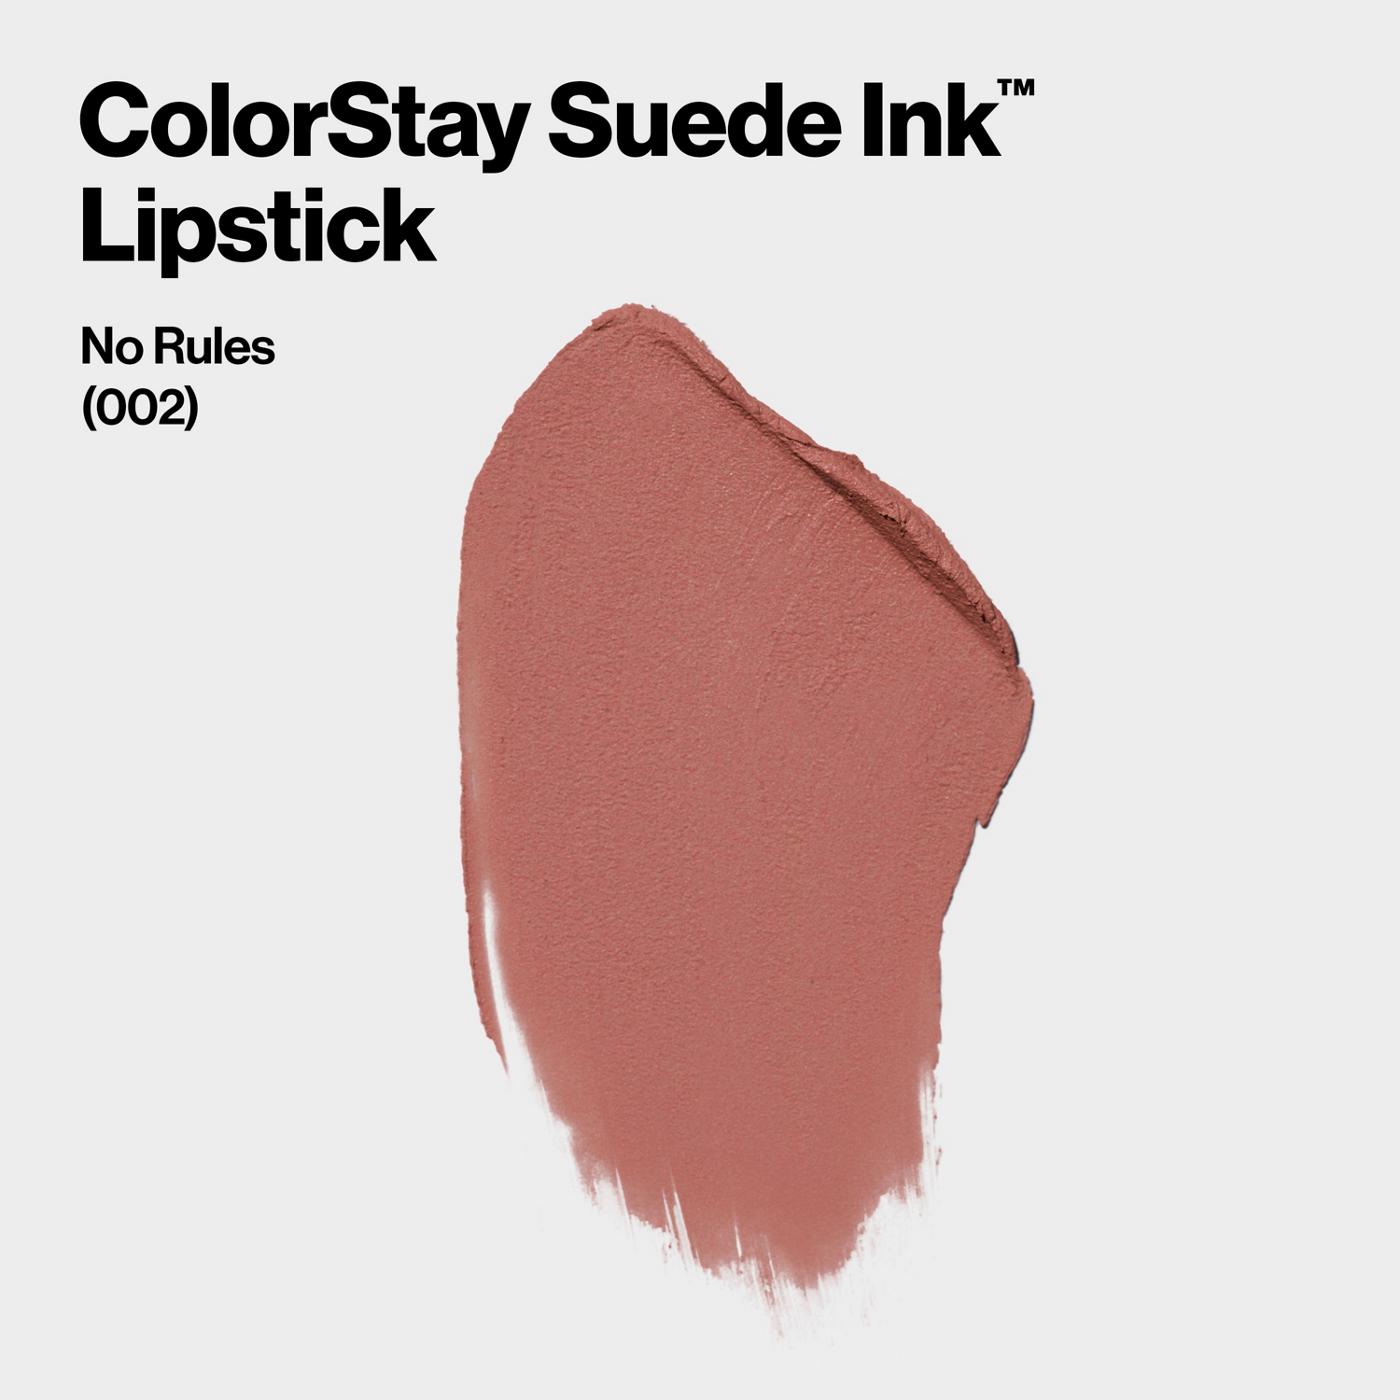 Revlon ColorStay Suede Ink Lipstick - No Rules; image 5 of 5